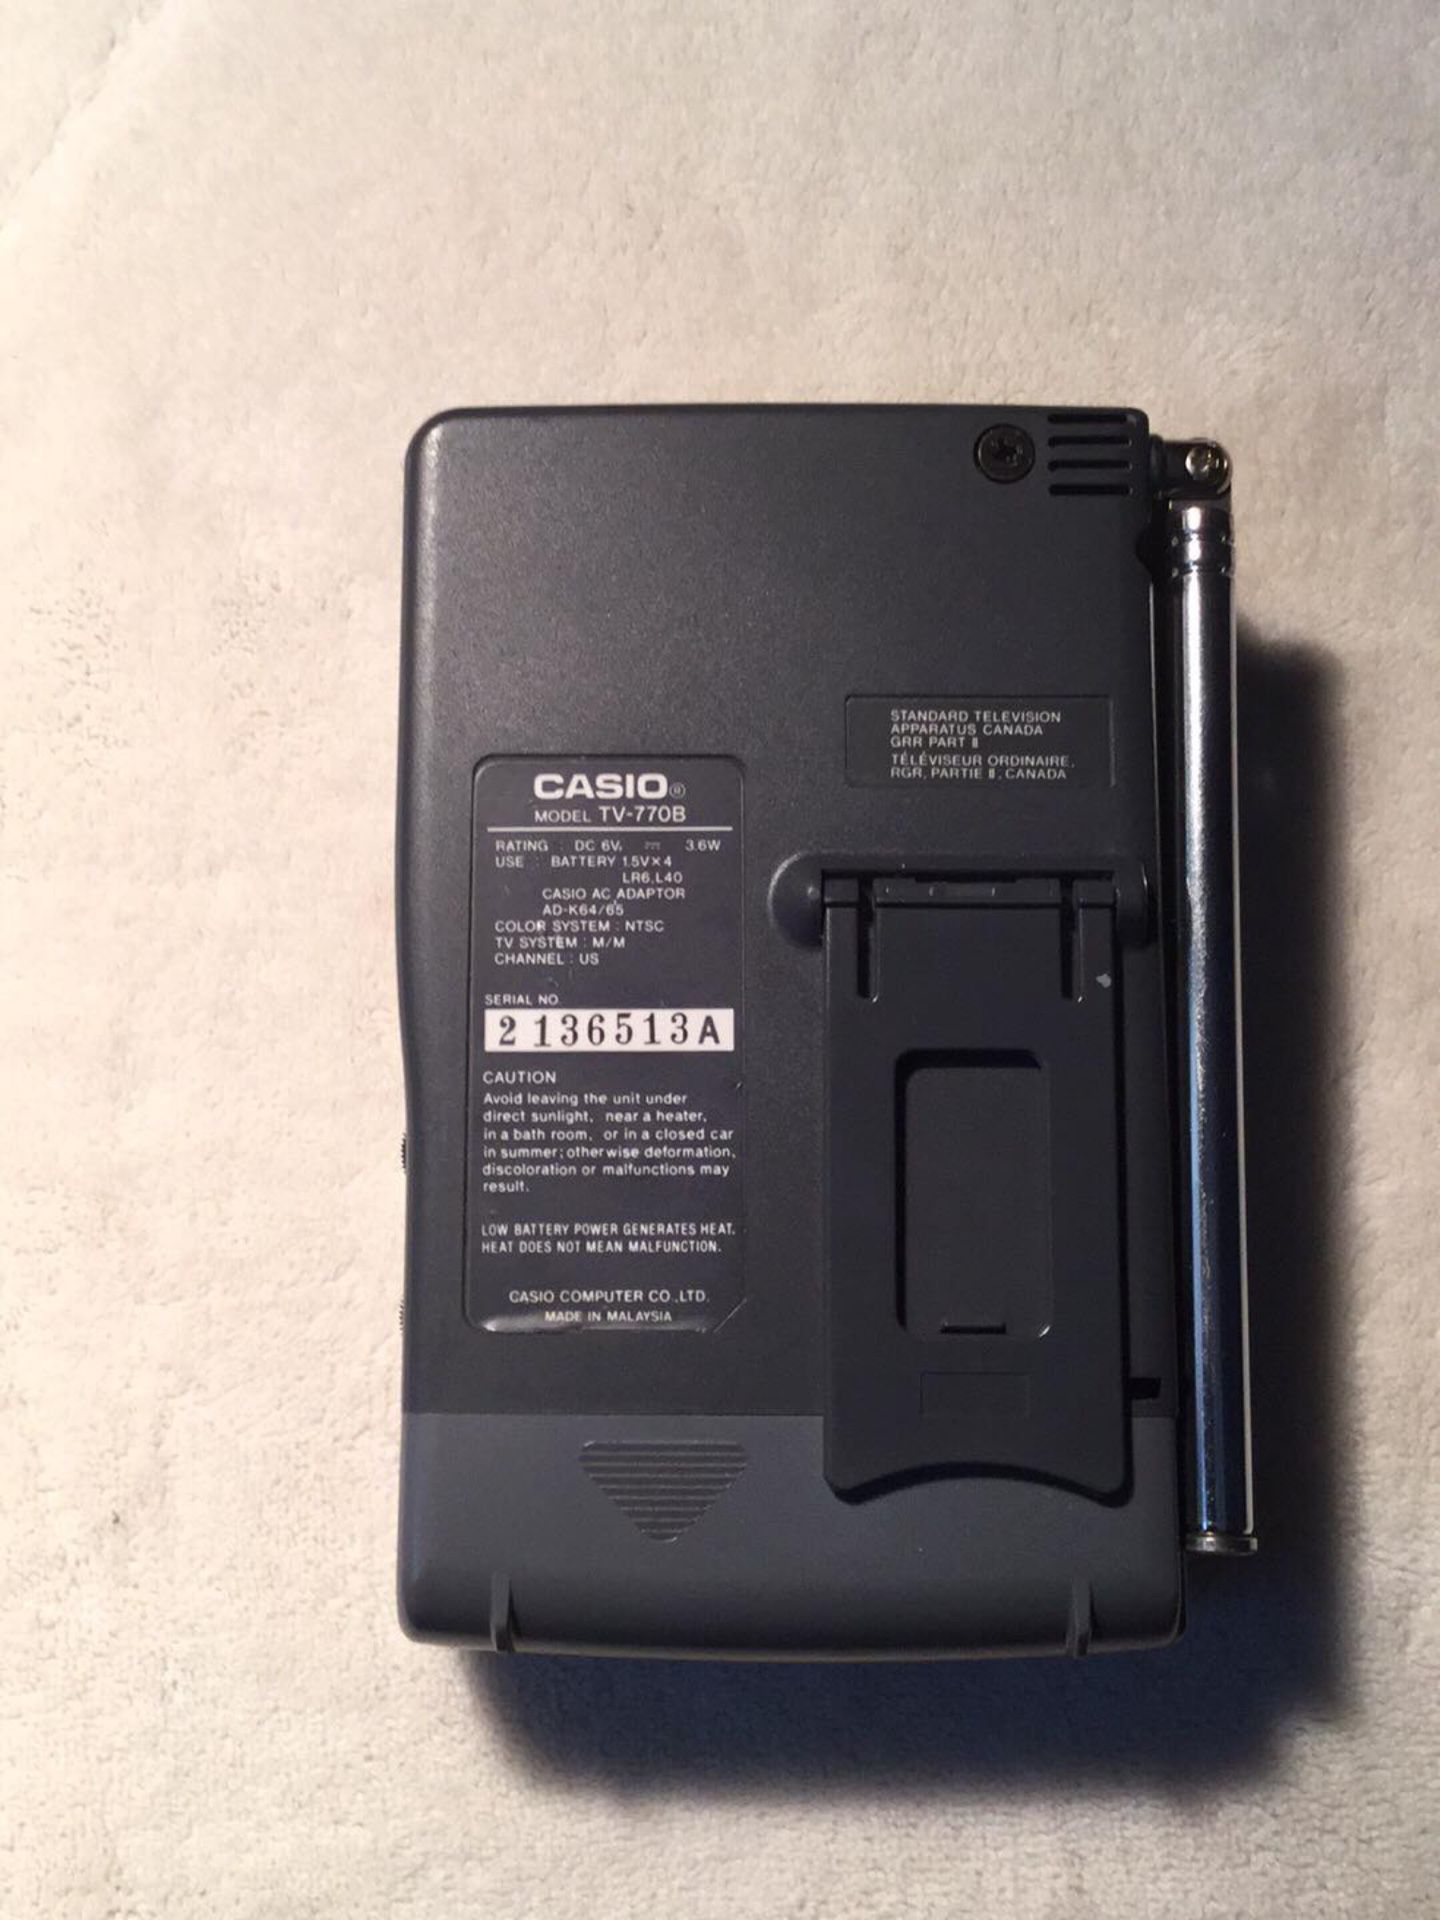 Casio portable TV for Sale in Las Vegas, NV - OfferUp